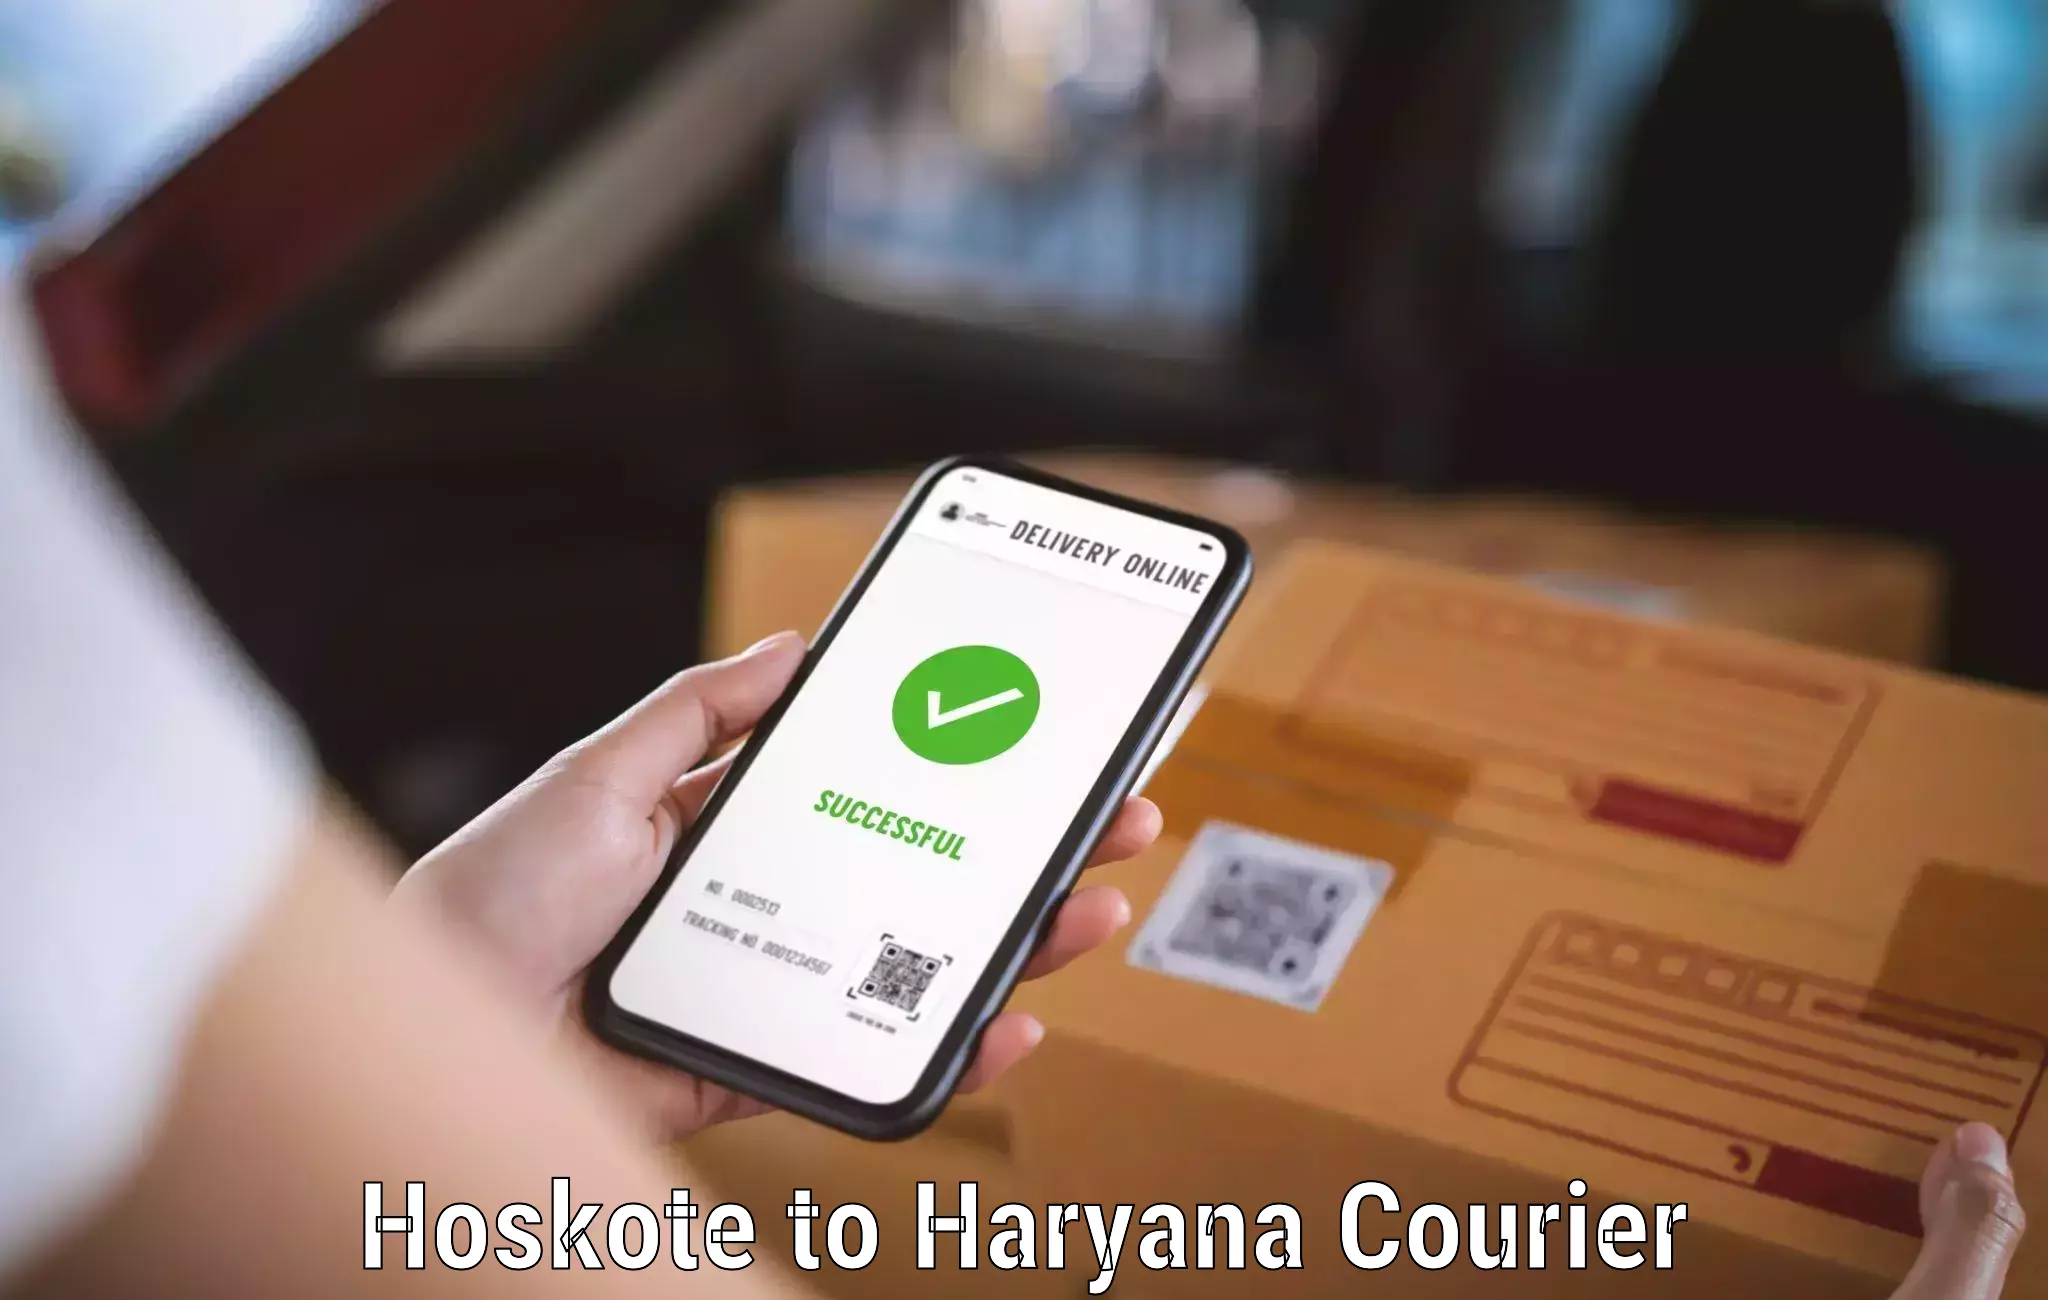 Courier service partnerships Hoskote to NCR Haryana